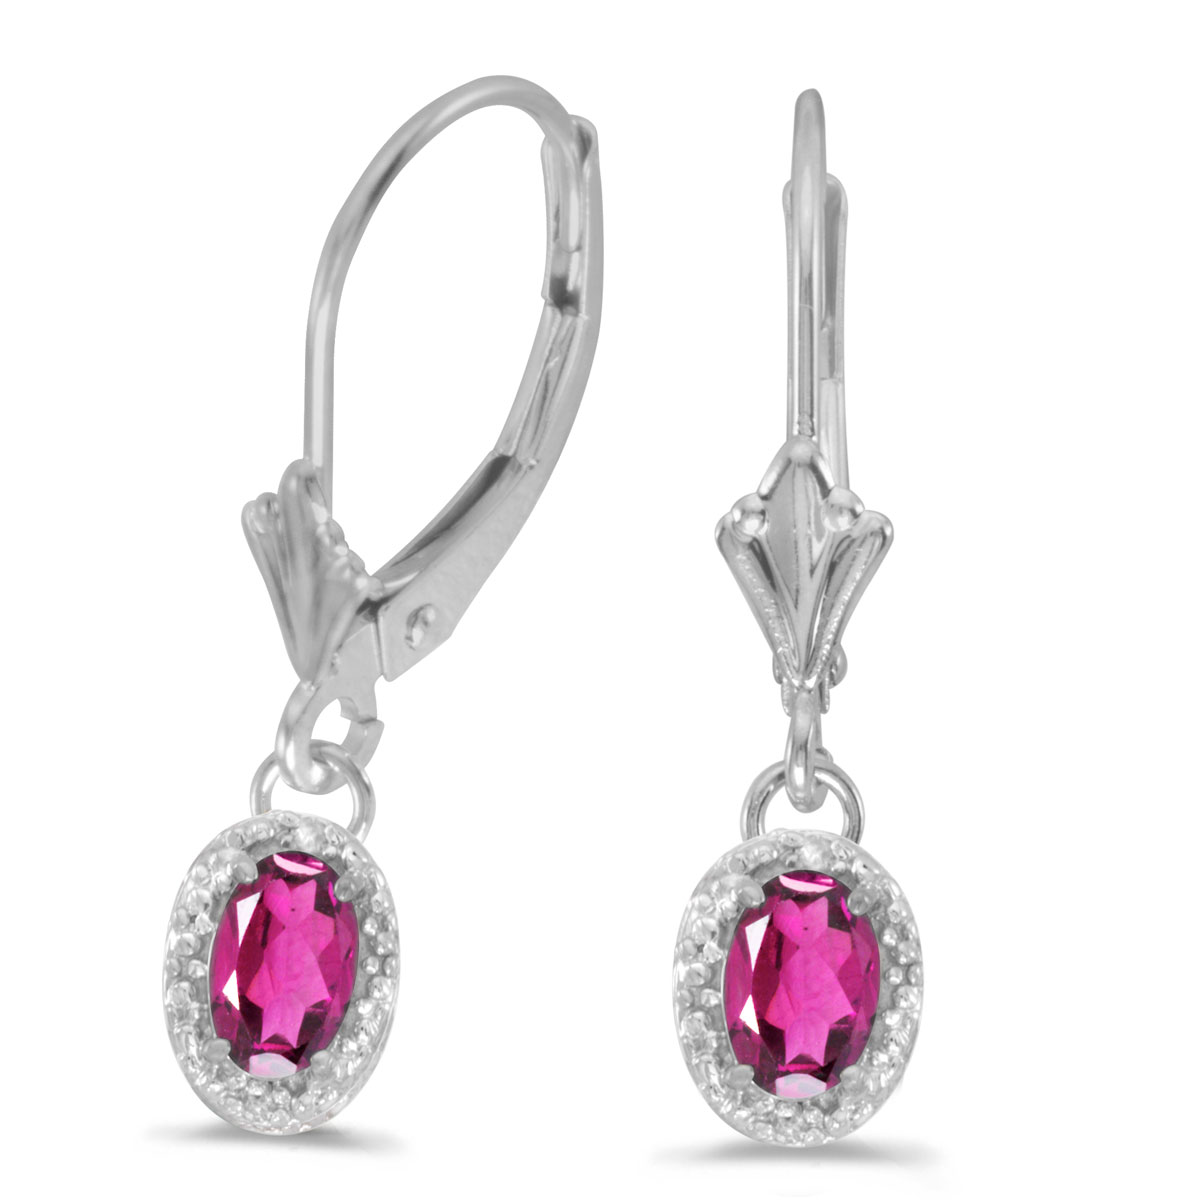 JCX2132: Beautiful 10k white gold leverback earrings with pretty 6x4 mm pink topaz stones complemented with bright diamonds.